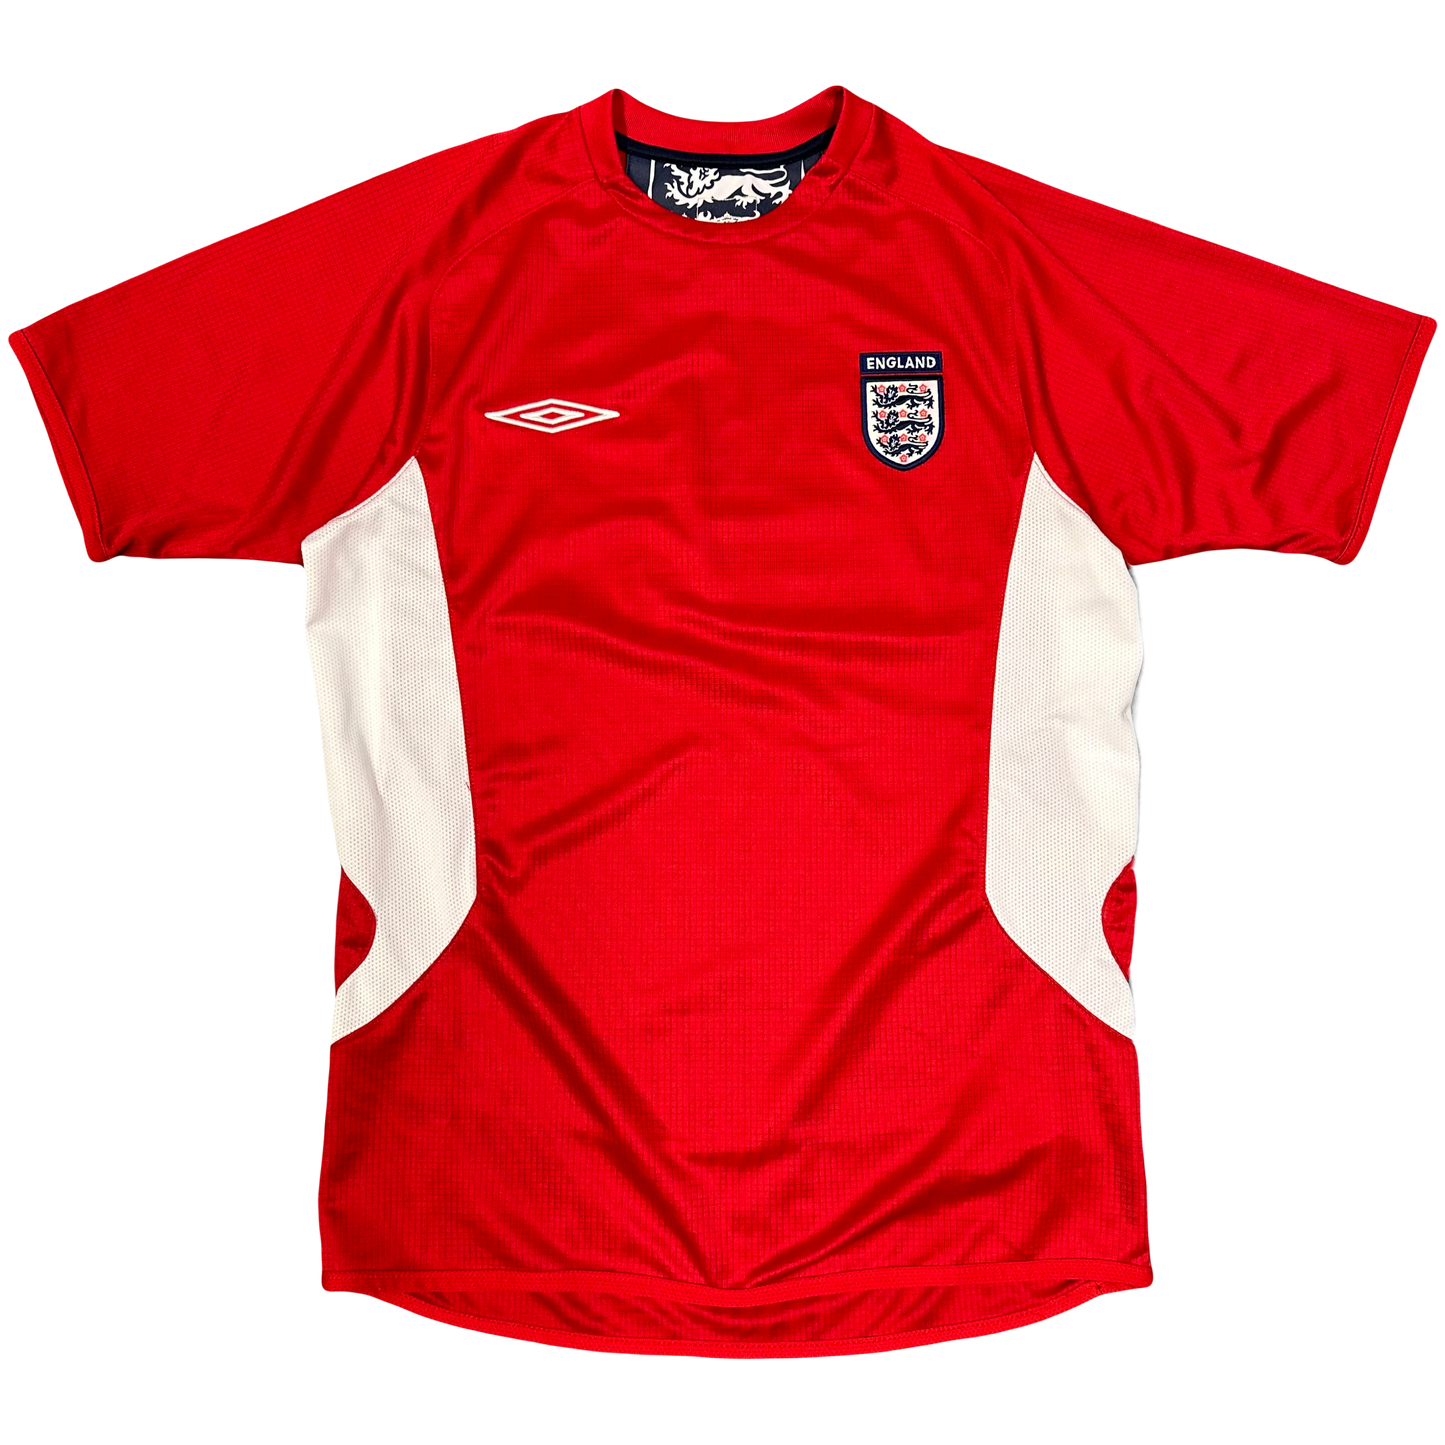 Umbro England 2006/07 Training Shirt In Red ( S )